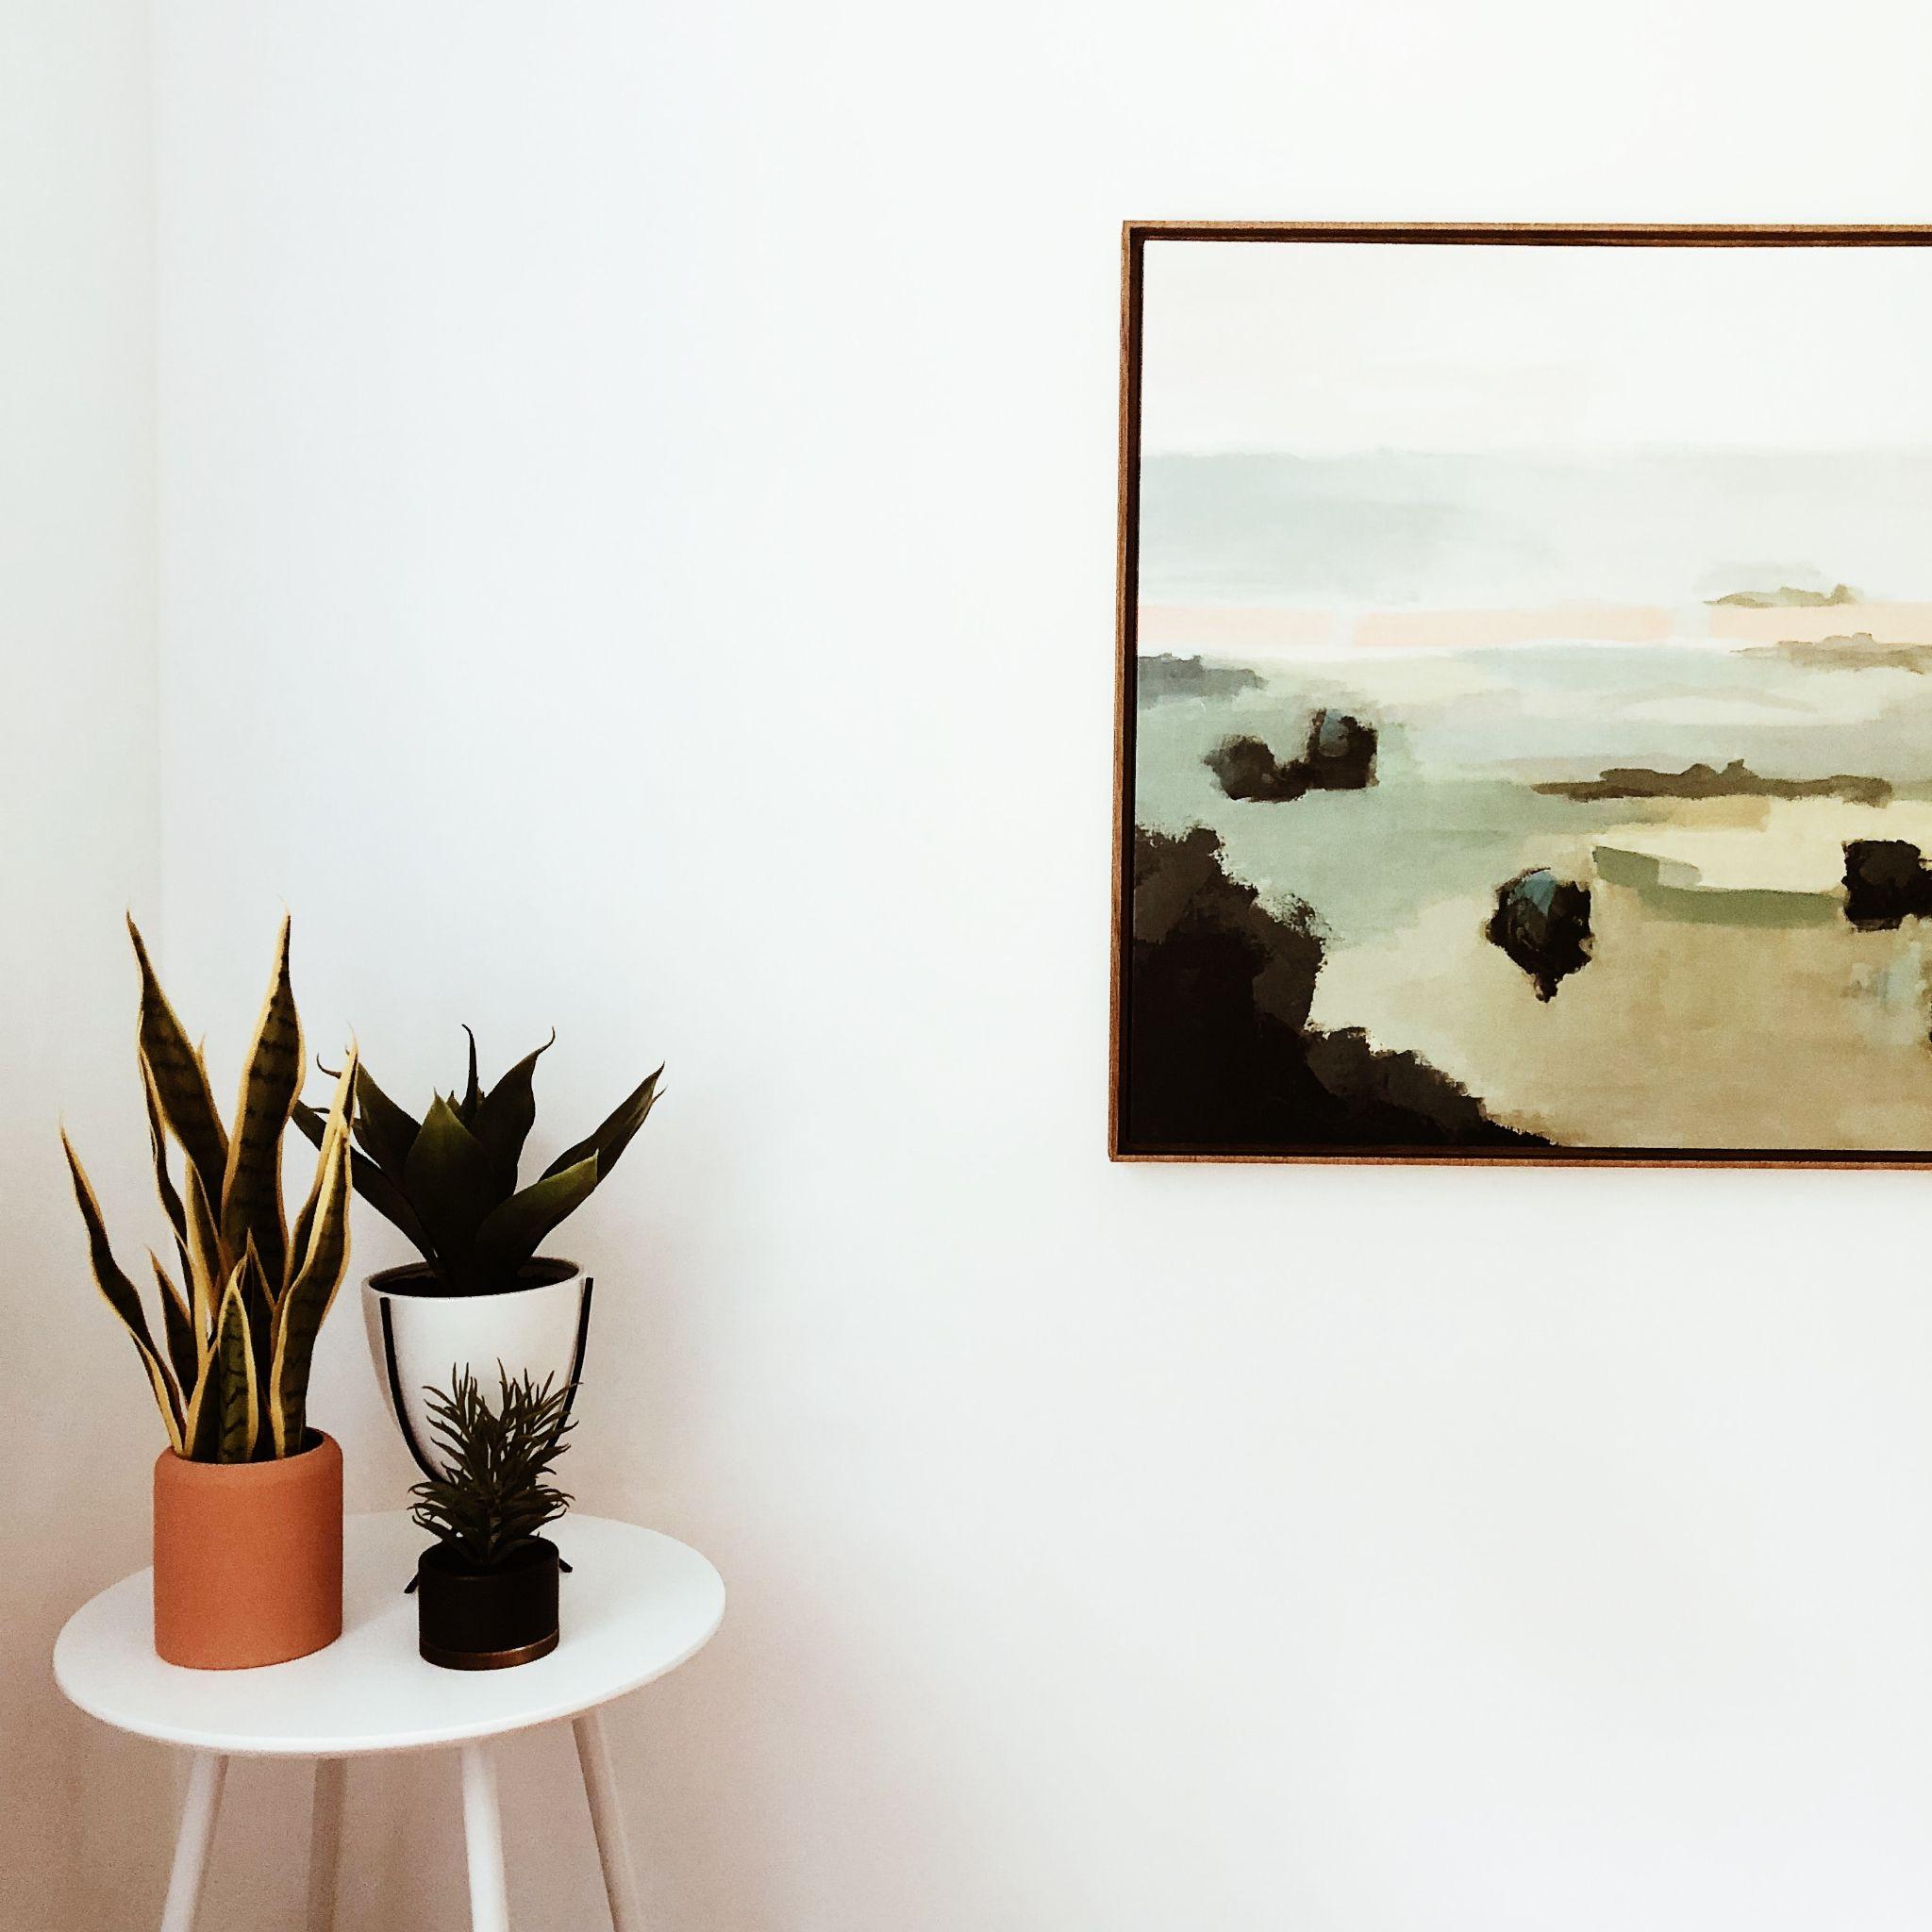 a minimalist painting and table with plant